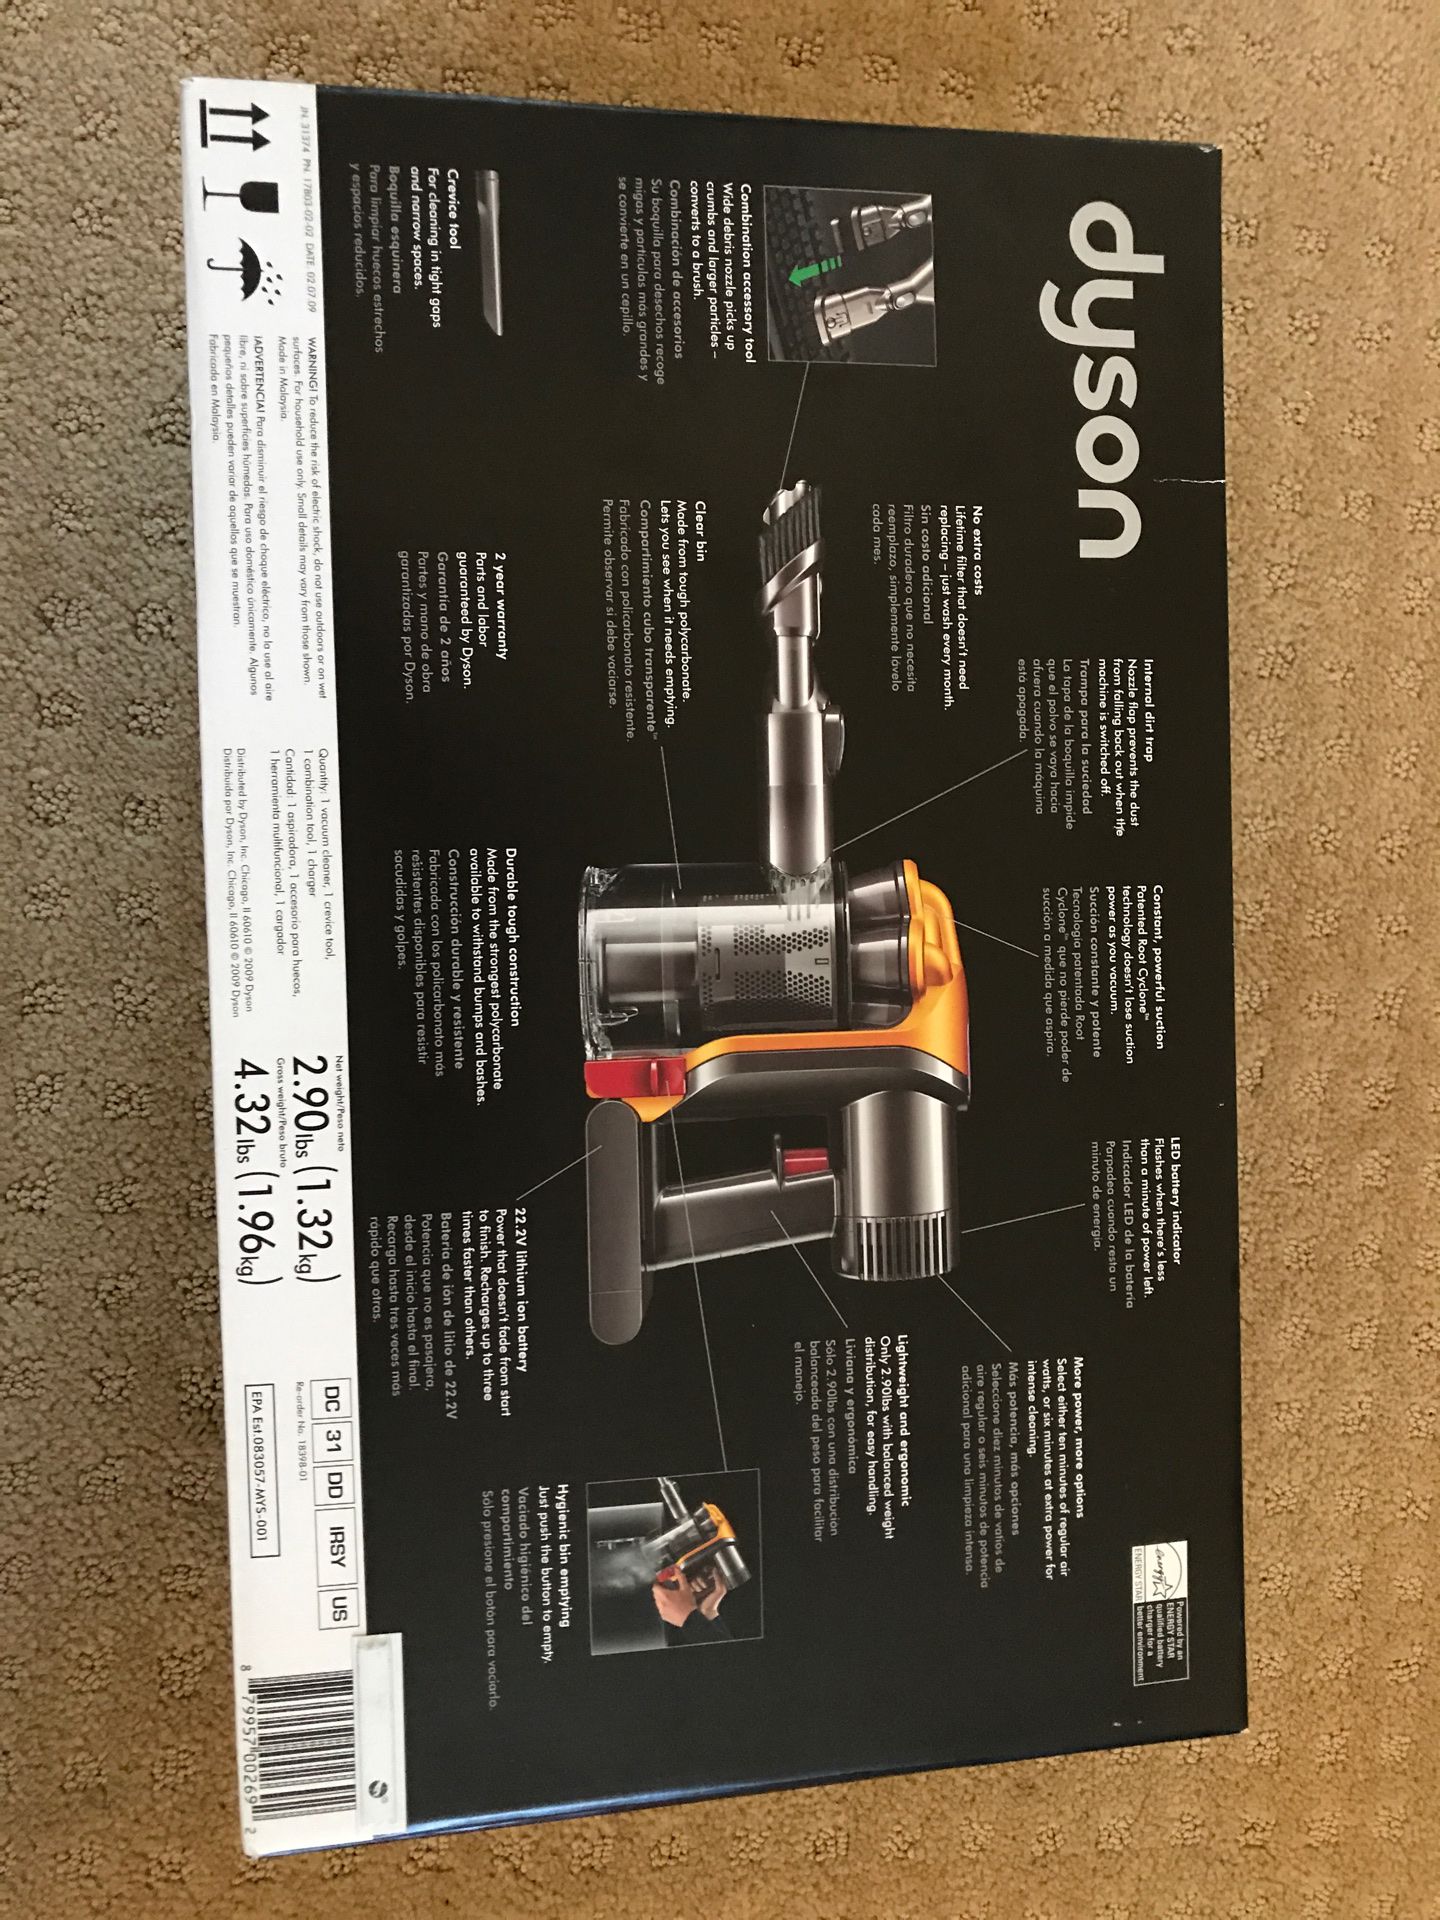 Dyson Dc31 In Vacuum Cleaners